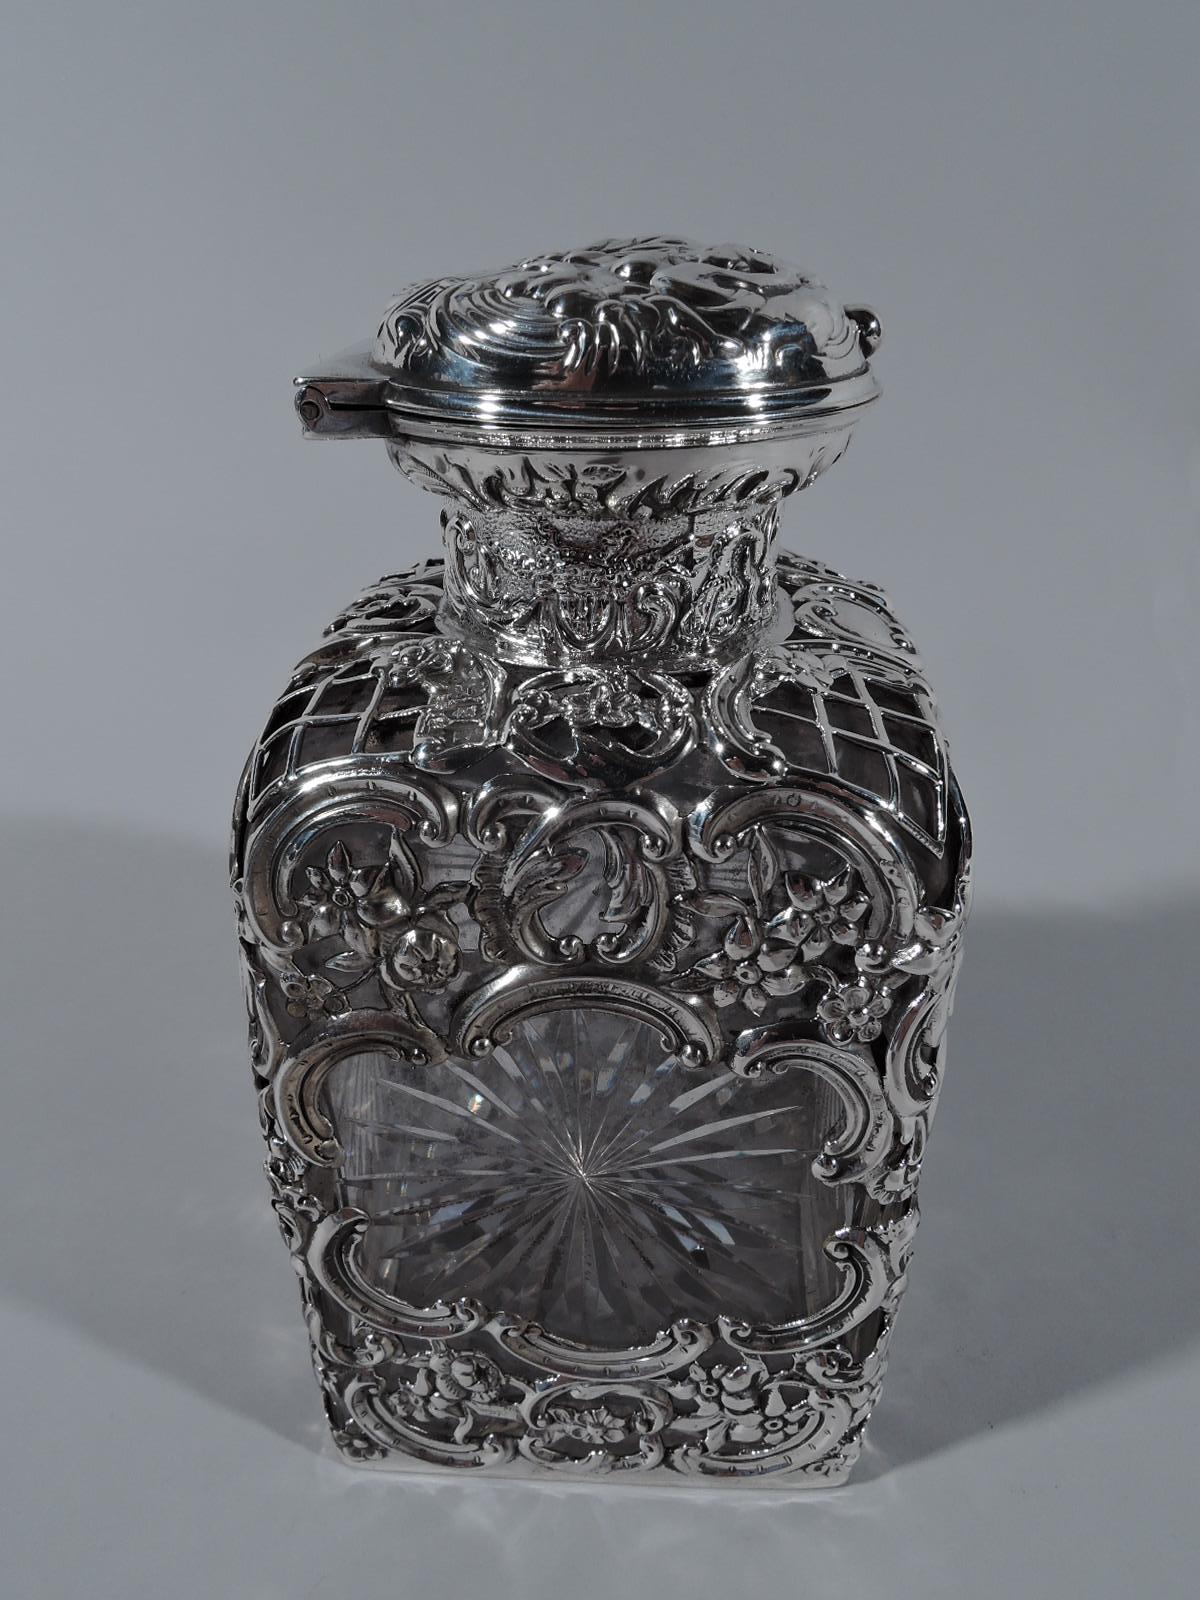 Edwardian Rococo clear glass perfume in sterling silver cage. Made by William Comyns in London in 1903. Rectilinear with short neck. Sterling silver cage with open multifoils revealing cut-stars, and pierced flowers, scrolls, and diaper. Short neck